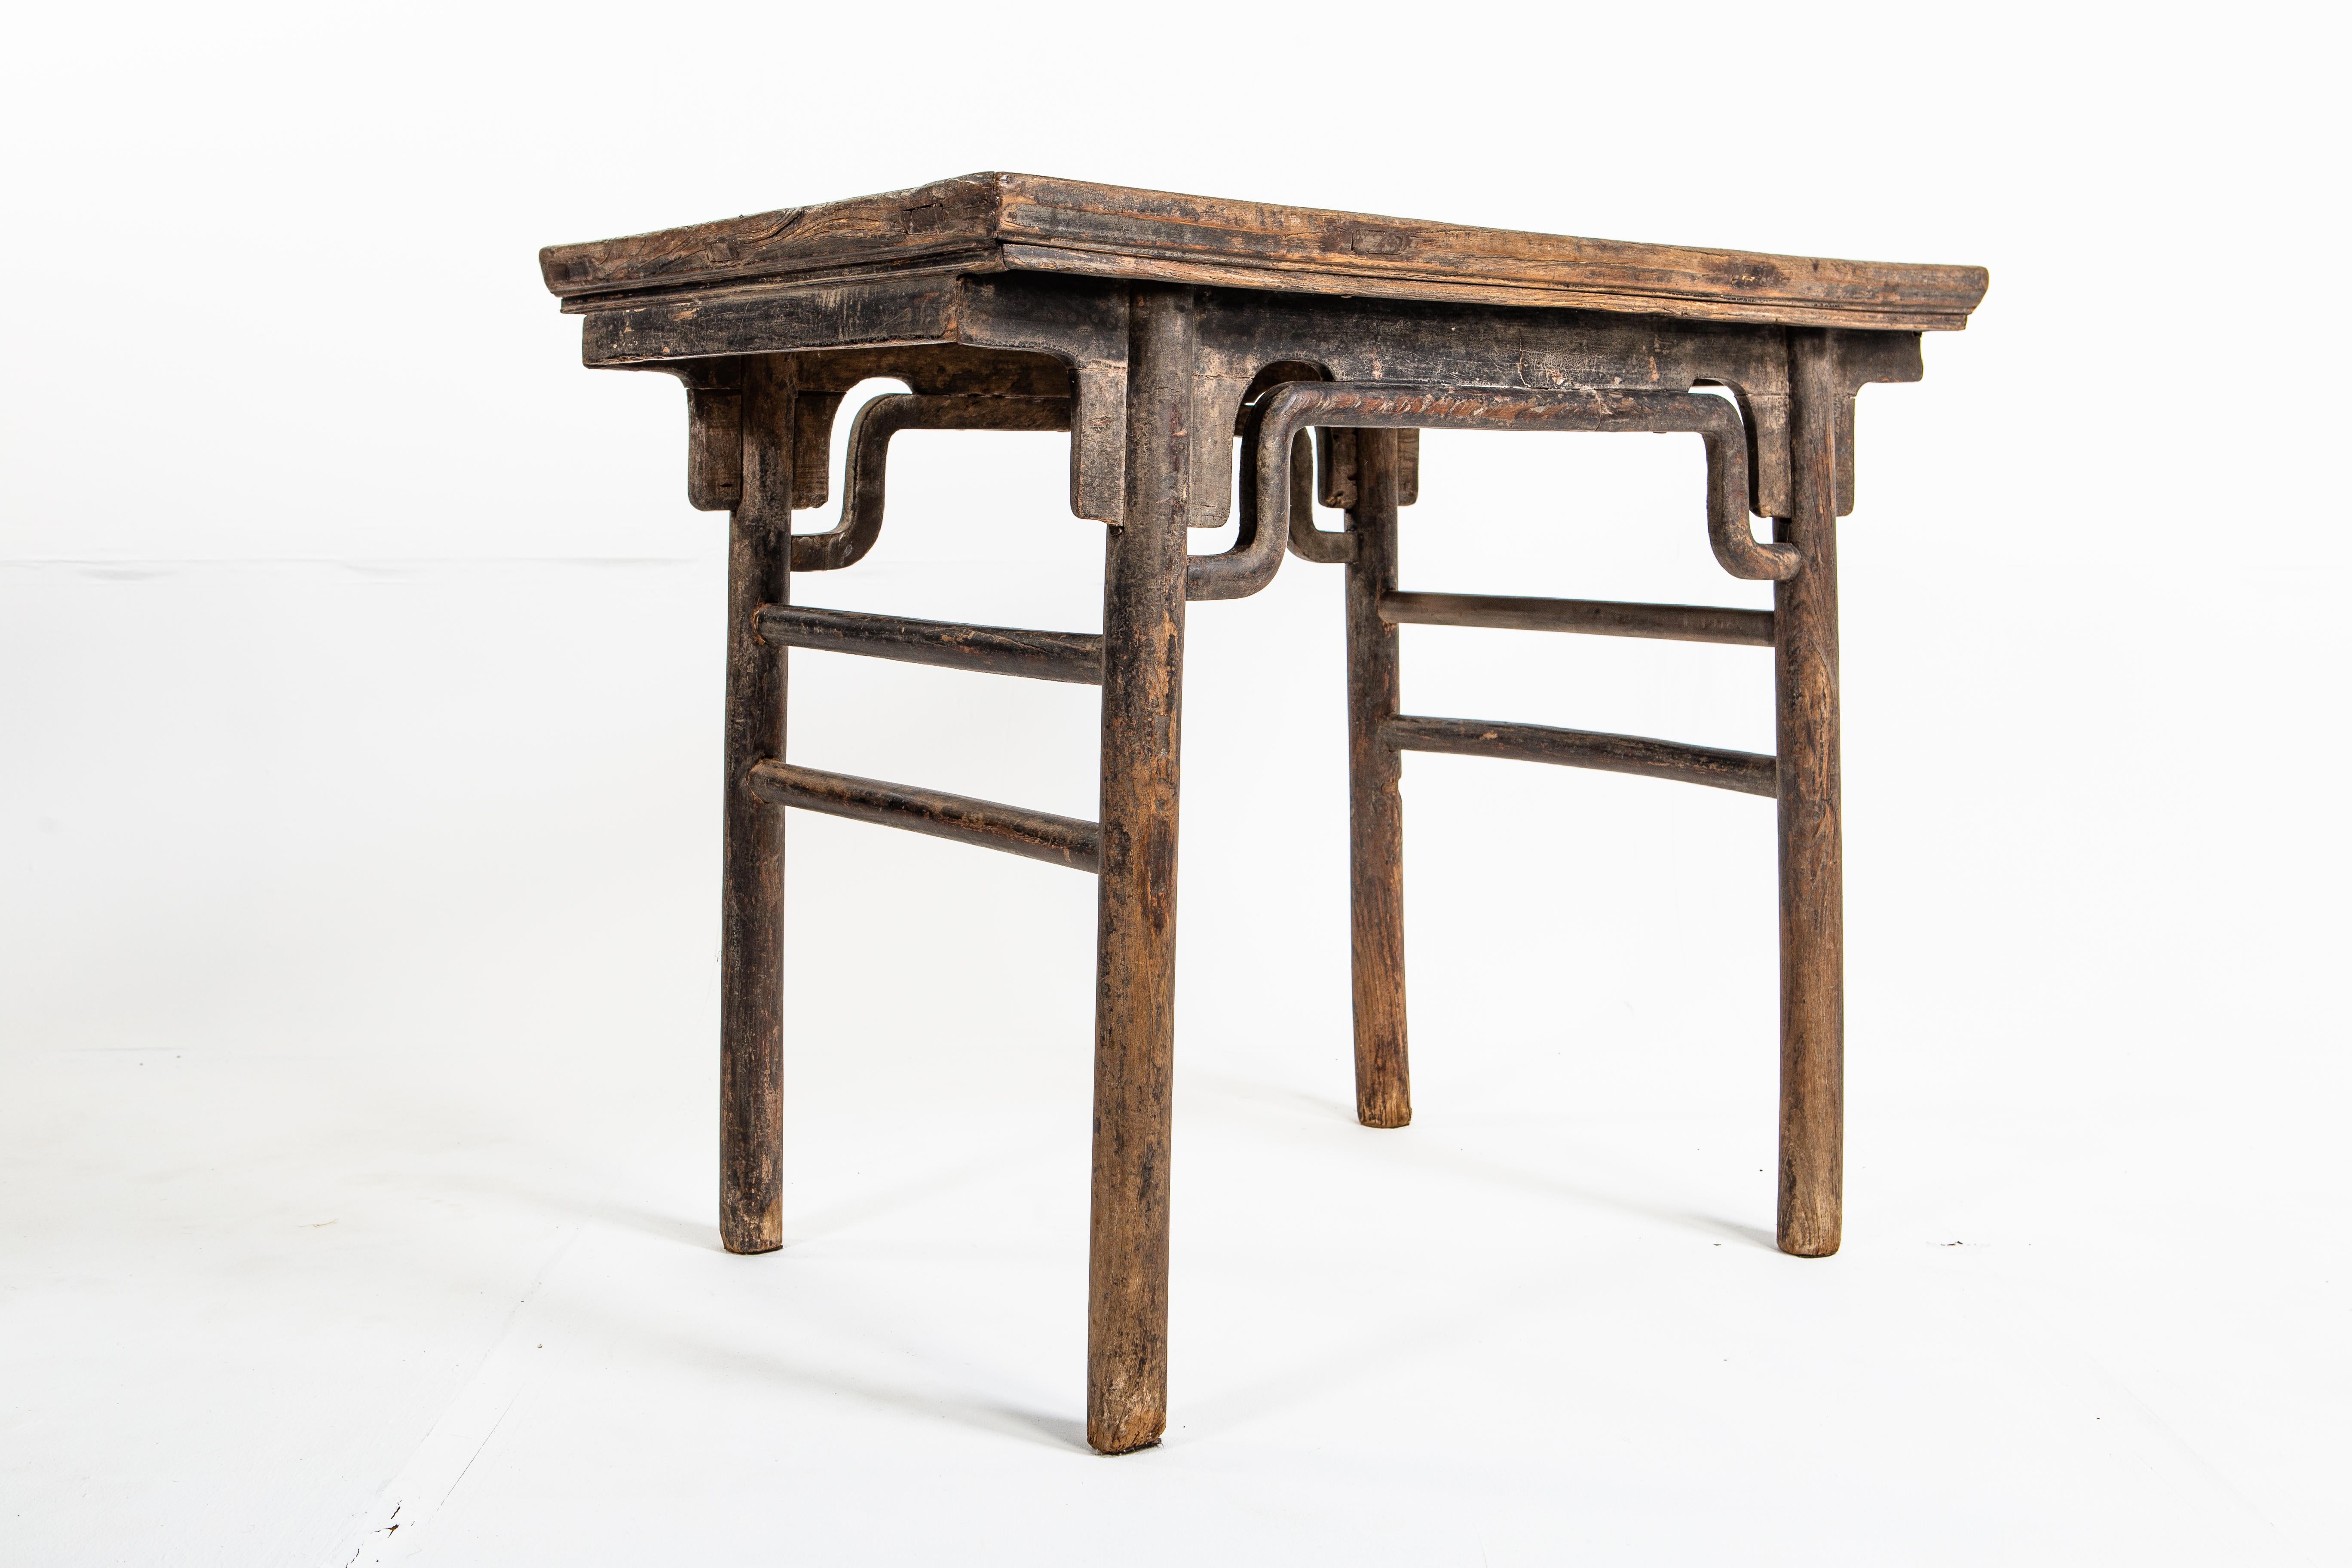 Rectangular drawing table with round legs and original lacquer finish. This table dates back to the early-Qing dynasty and was from Shanxi Province, China. Piece has a beautifully aged patina.